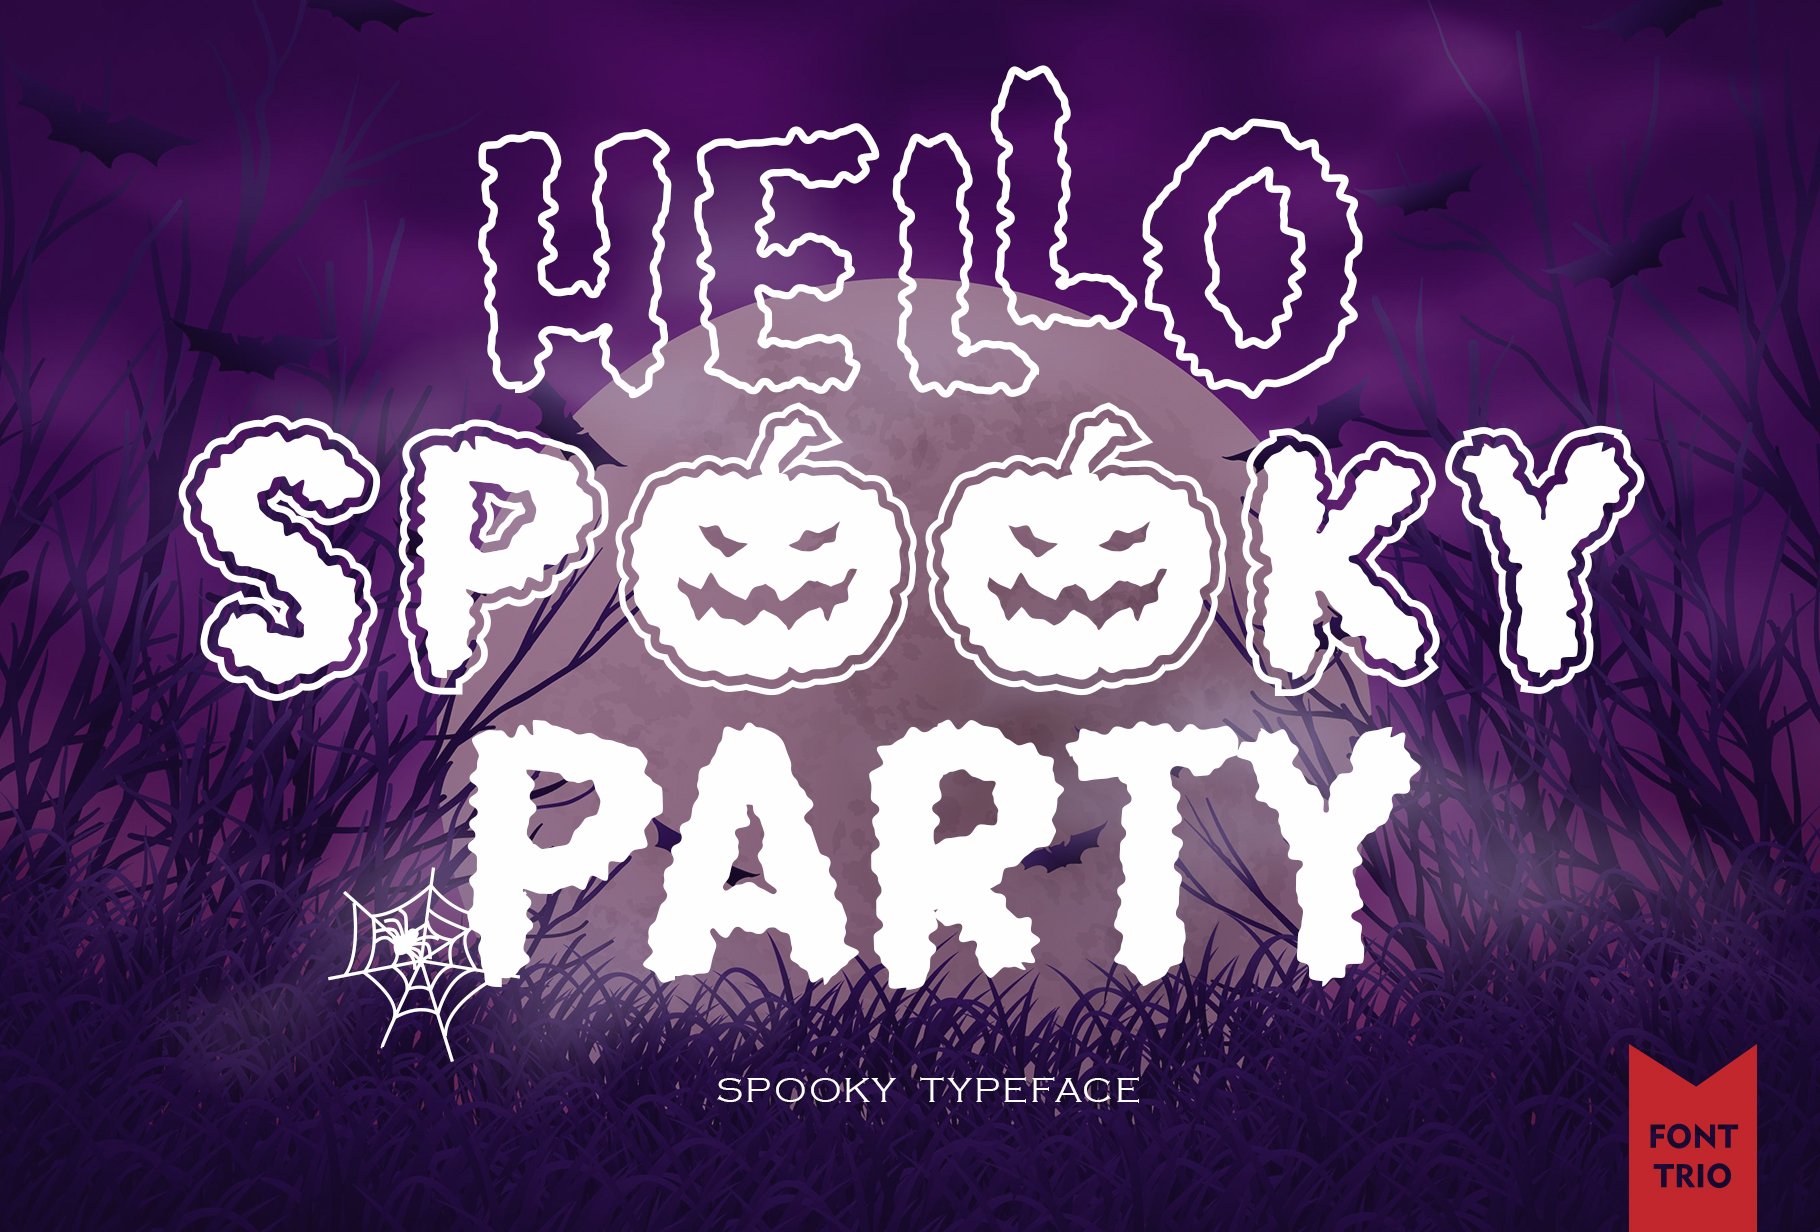 Spooky Party Font | Font Trio cover image.